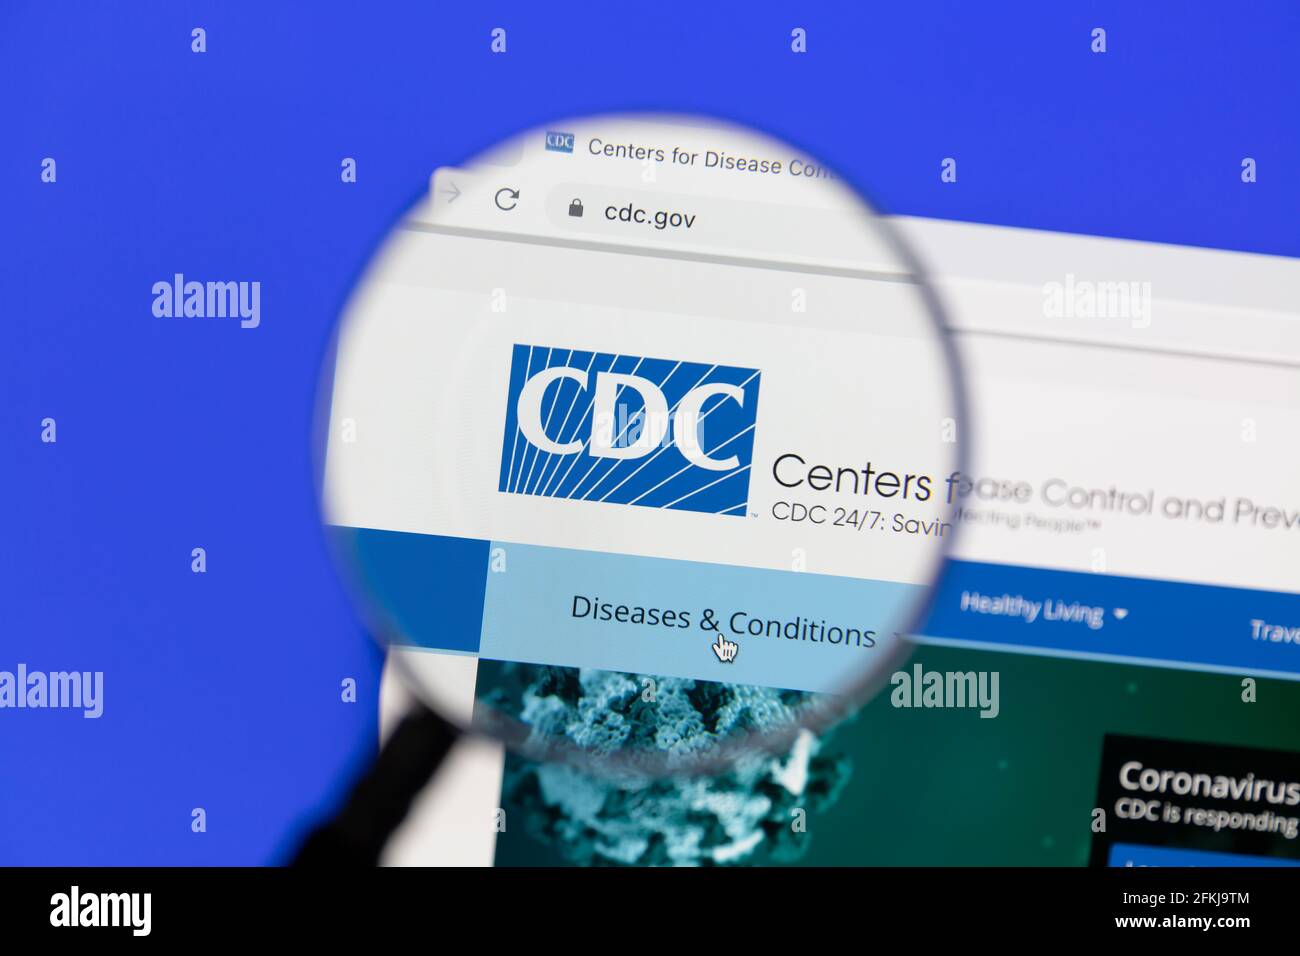 Ostersund, Sweden - Mars 16, 2021: Centers for Disease Control and Prevention (CDC) website. CDC is the national public health agency of the USA. Stock Photo